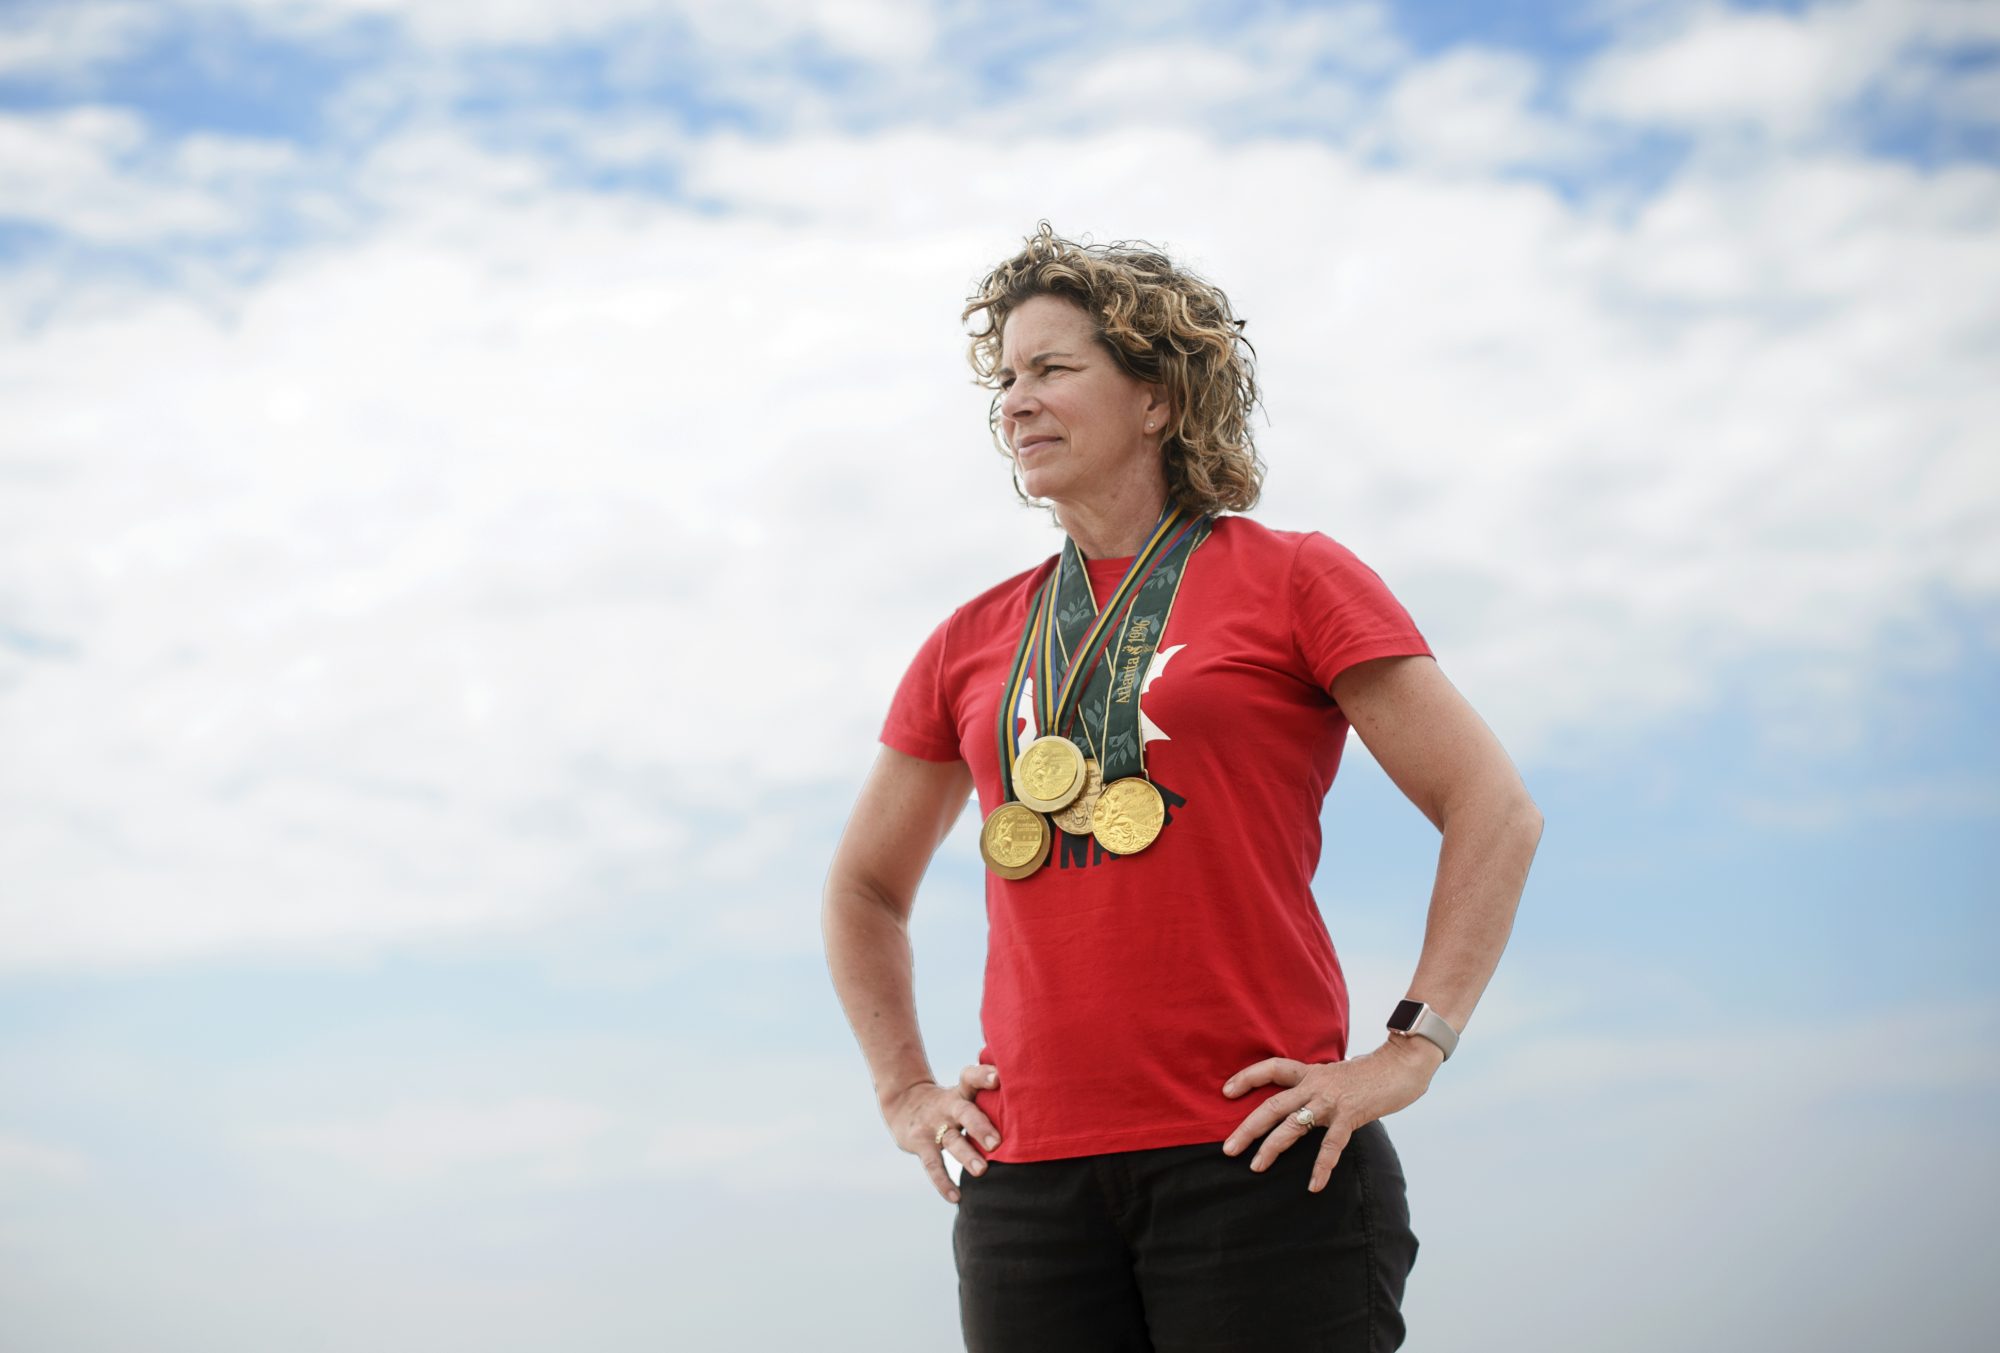 TORONTO, Ont. (28/06/19) - Team Canada's Chef de Mission for the Tokyo 2020 games Marnie McBean poses for a portrait at the Argonauts Rowing Club on June 28, 2019. Photo by Andrew Lahodynskyj